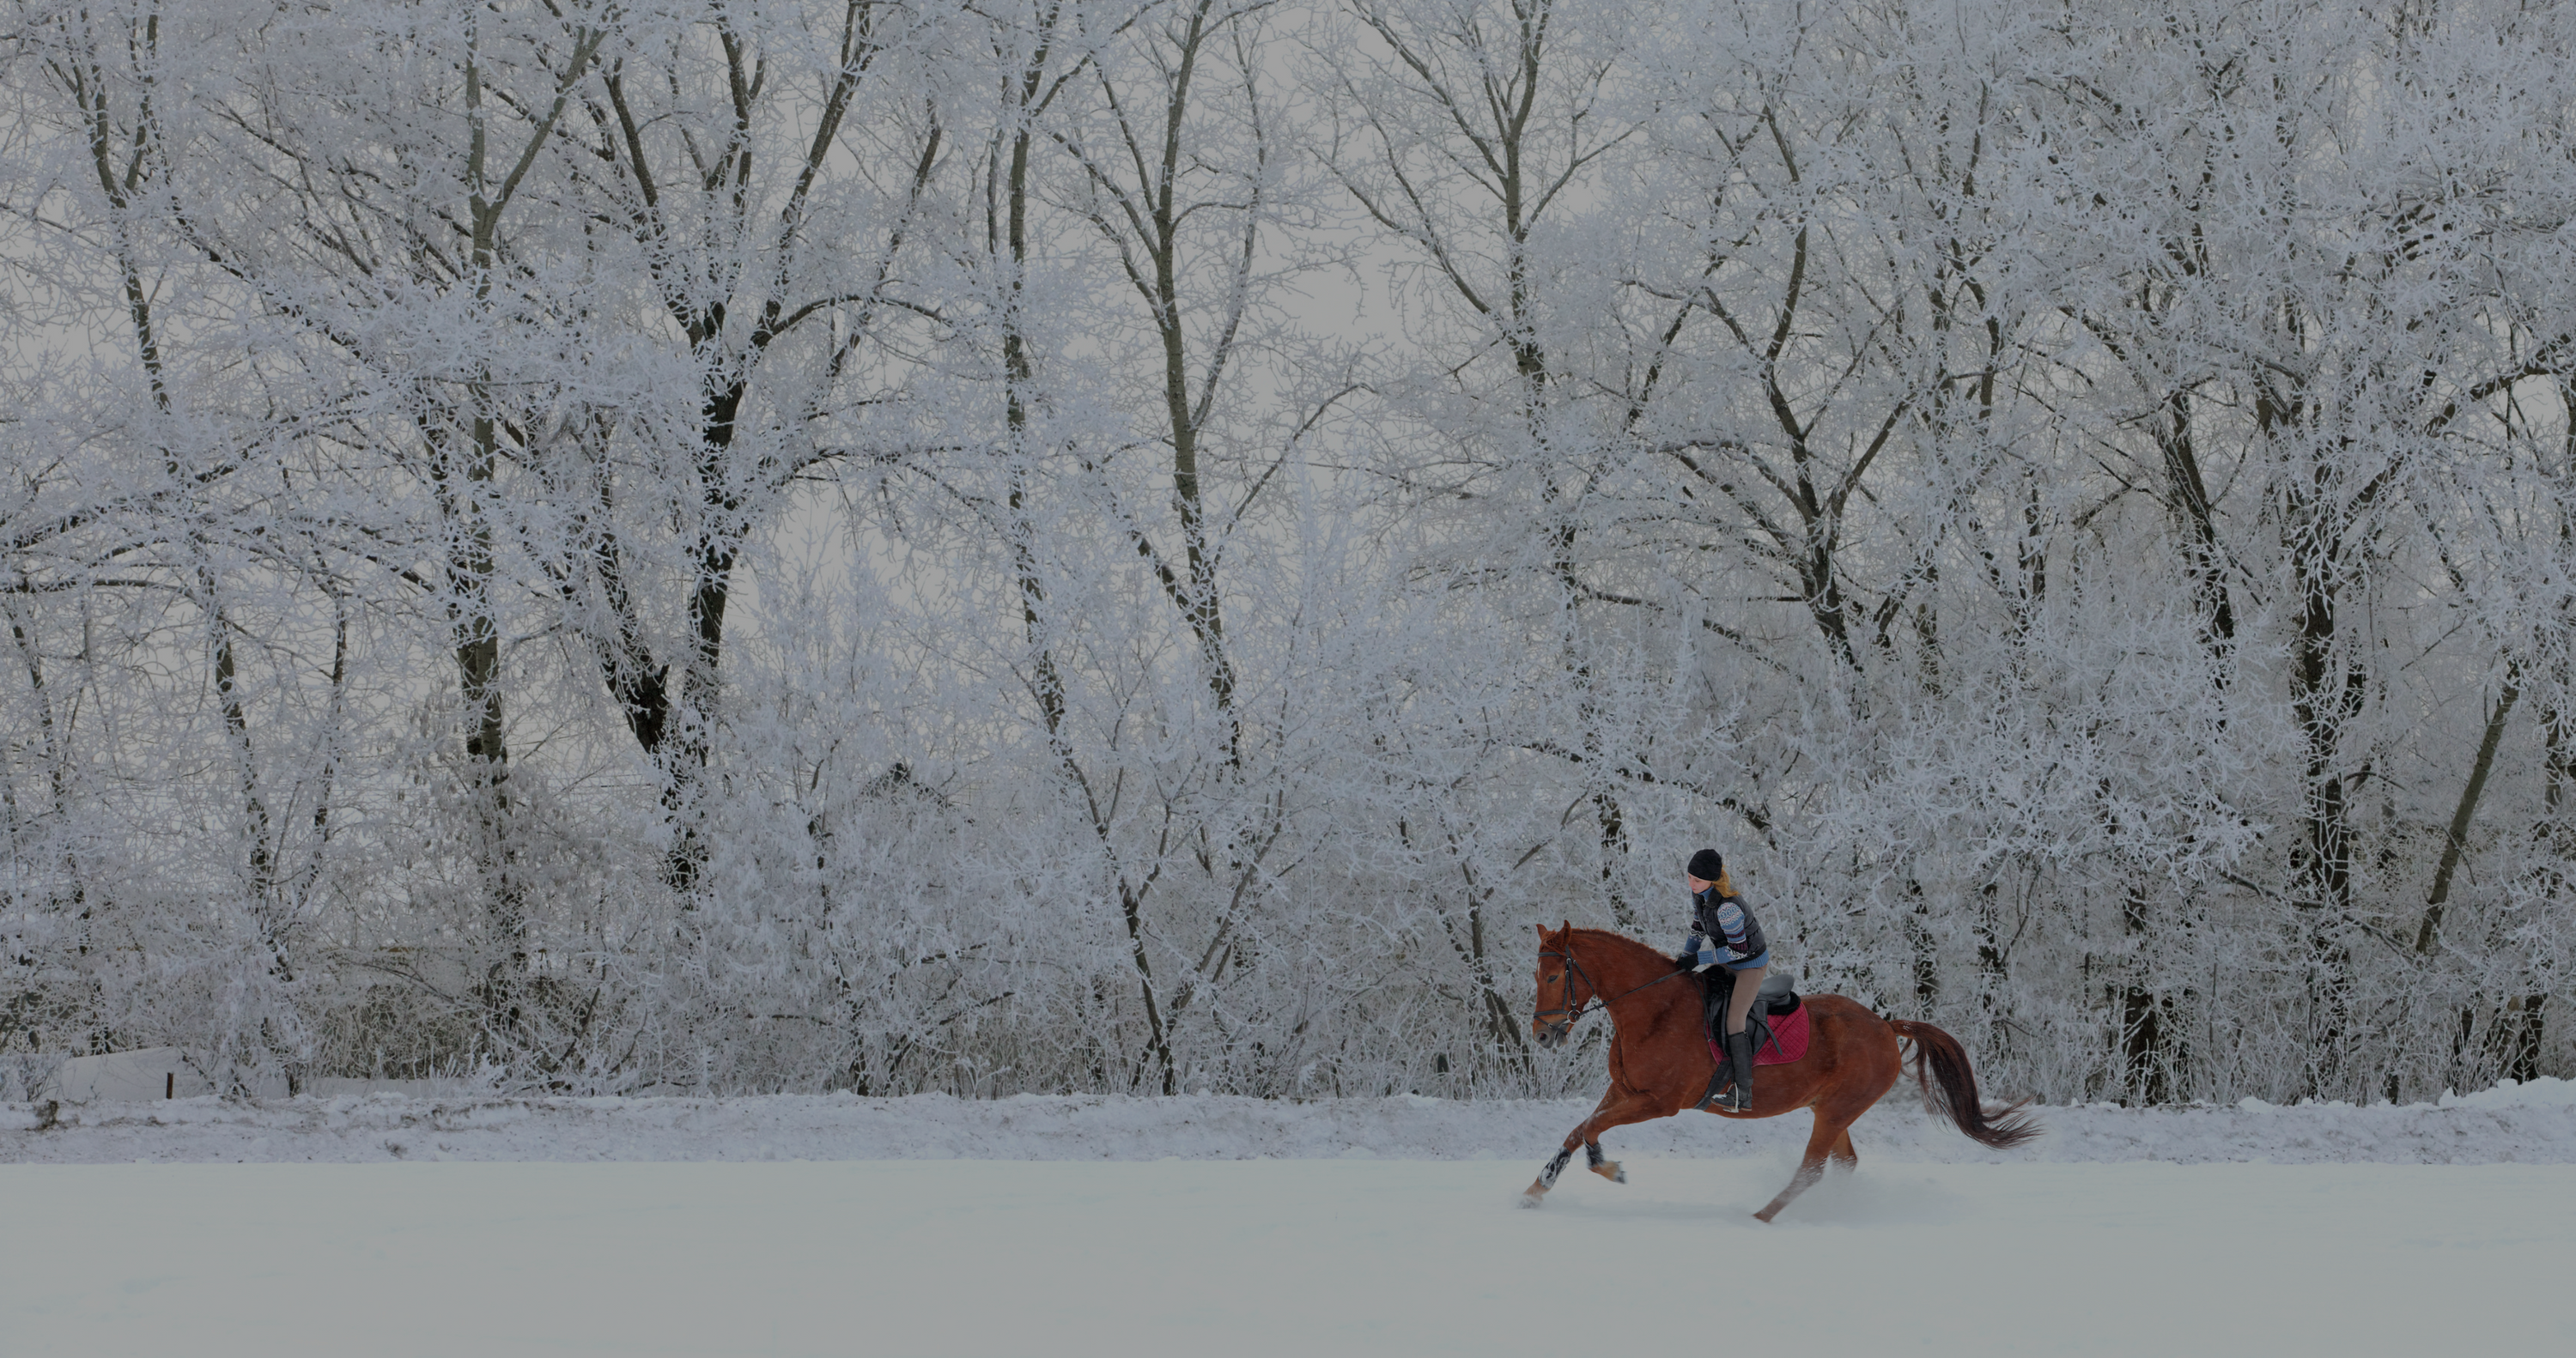 chestnut horse and rider galloping through snow, black friday sale, black friday deals, equestrian black friday